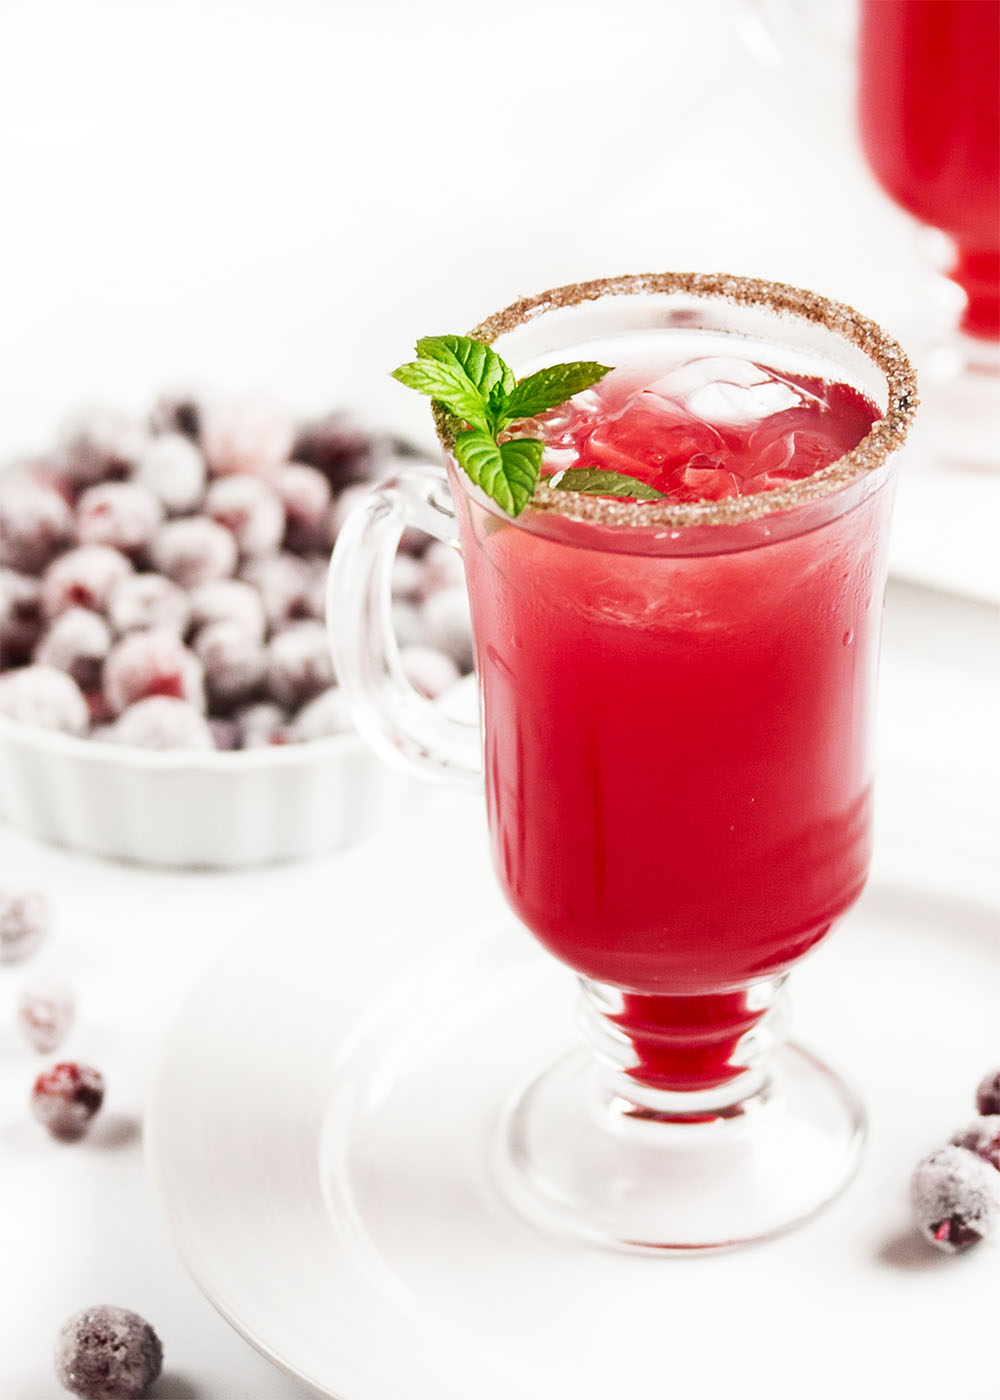 Cranberry Ginger Fizz Cocktail - This cranberry cocktail is an easy and tasty way to celebrate Thanksgiving and the winter holiday season. Just whip up a batch of the yummy cranberry syrup ahead of time and you are good to go. | justalittlebitofbacon.com